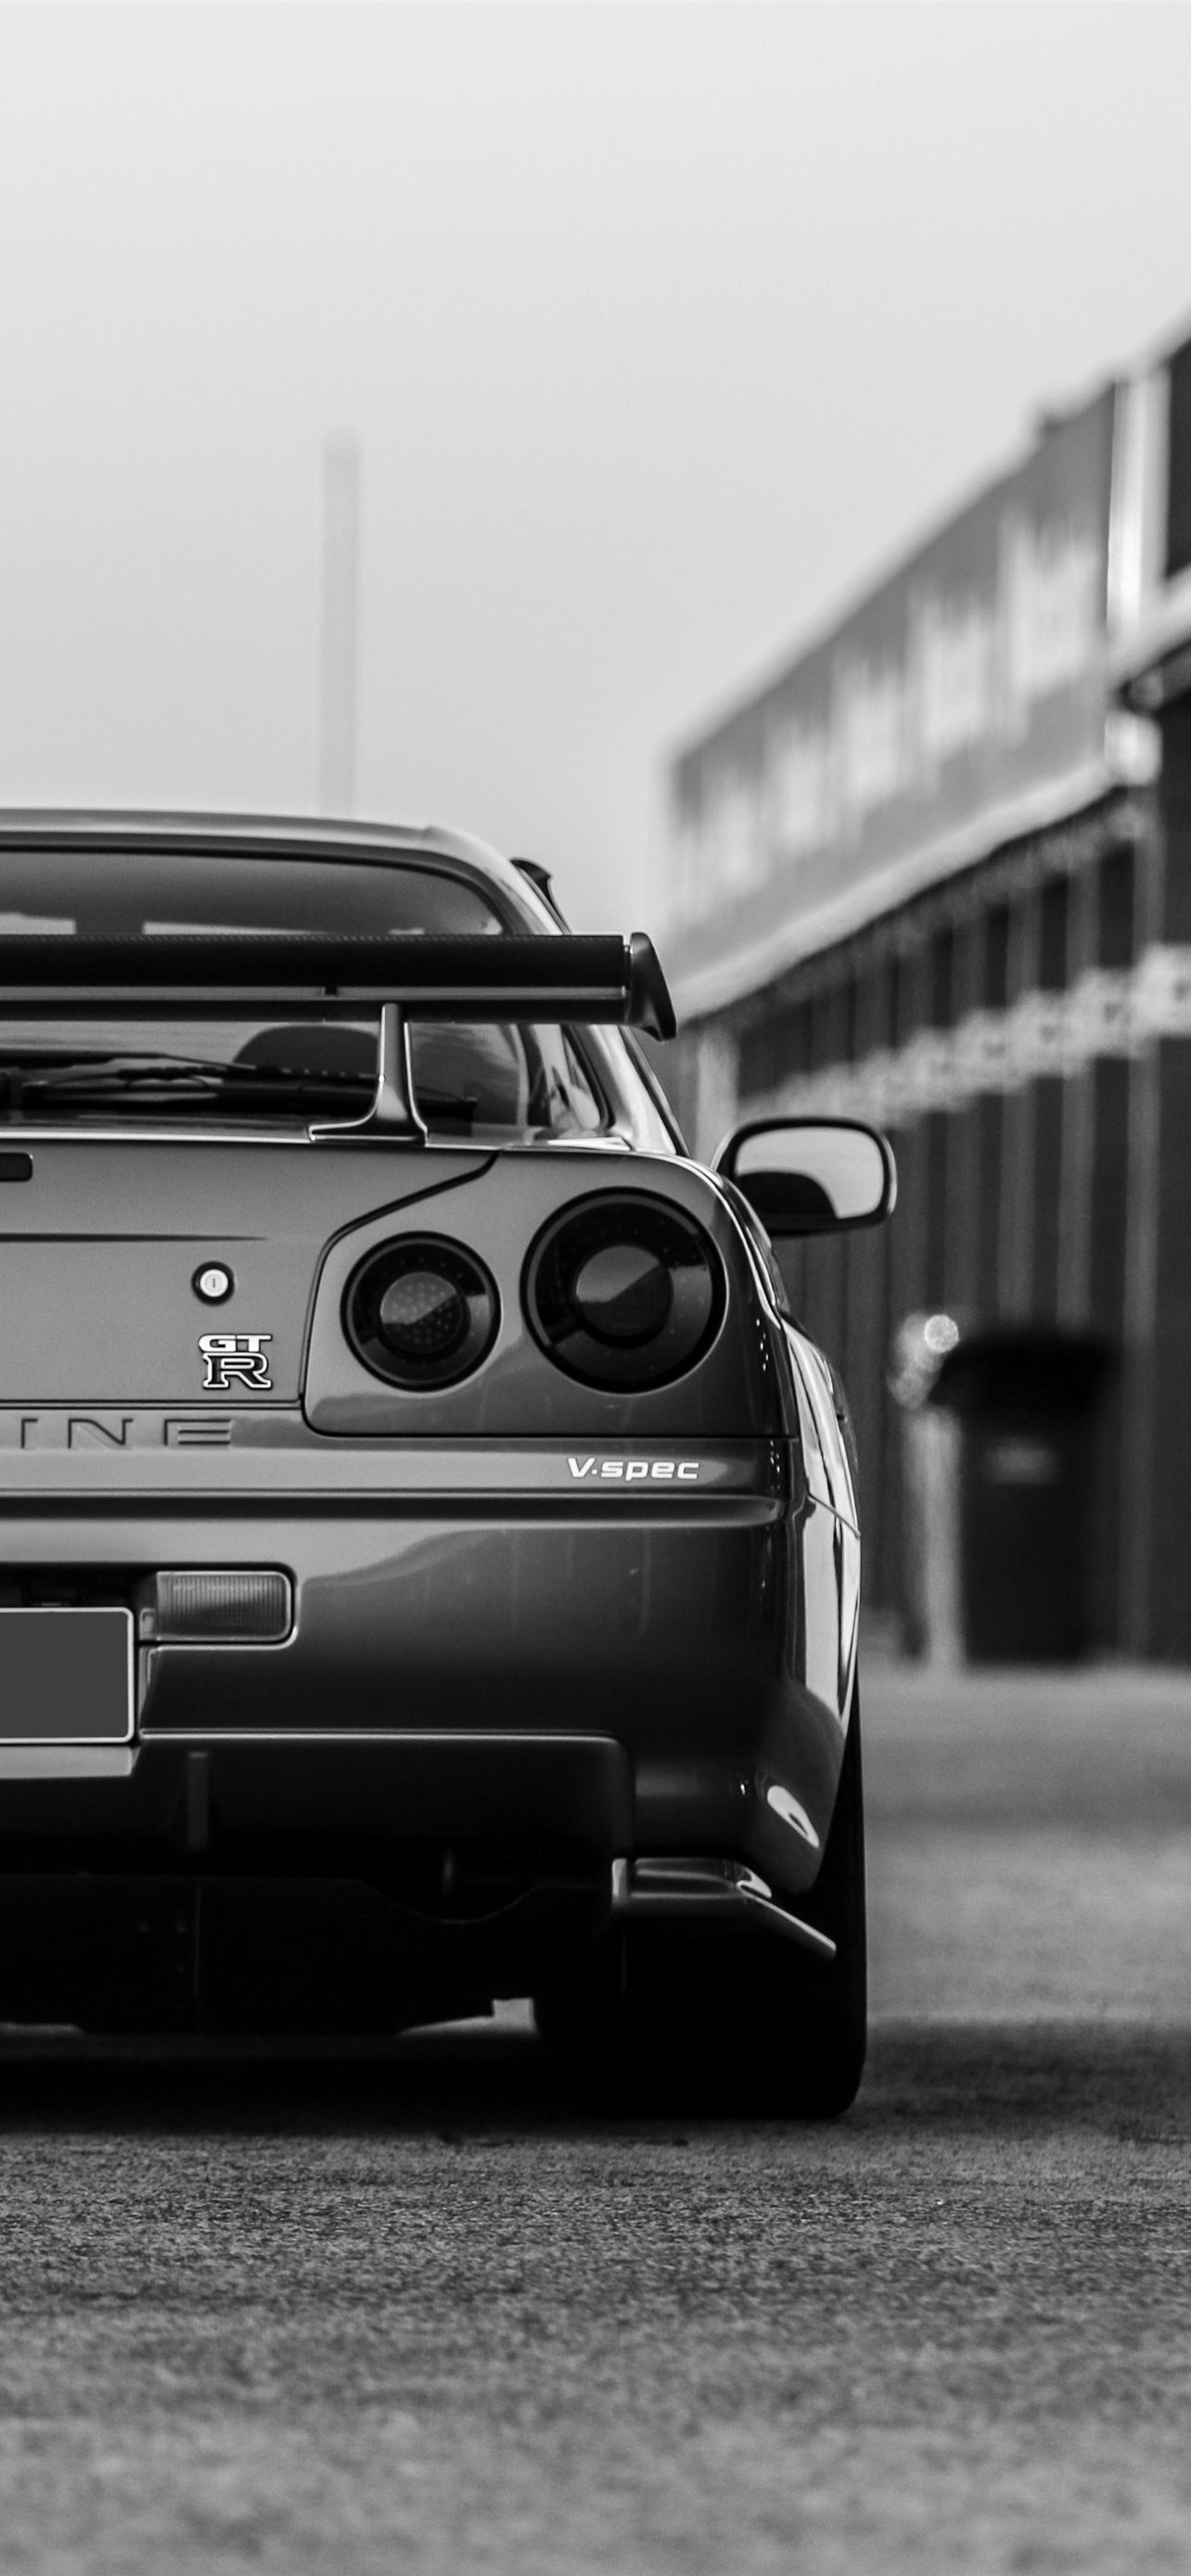 Nissan GT-R, Nismo edition, iPhone wallpapers, Free download, 1290x2780 HD Handy